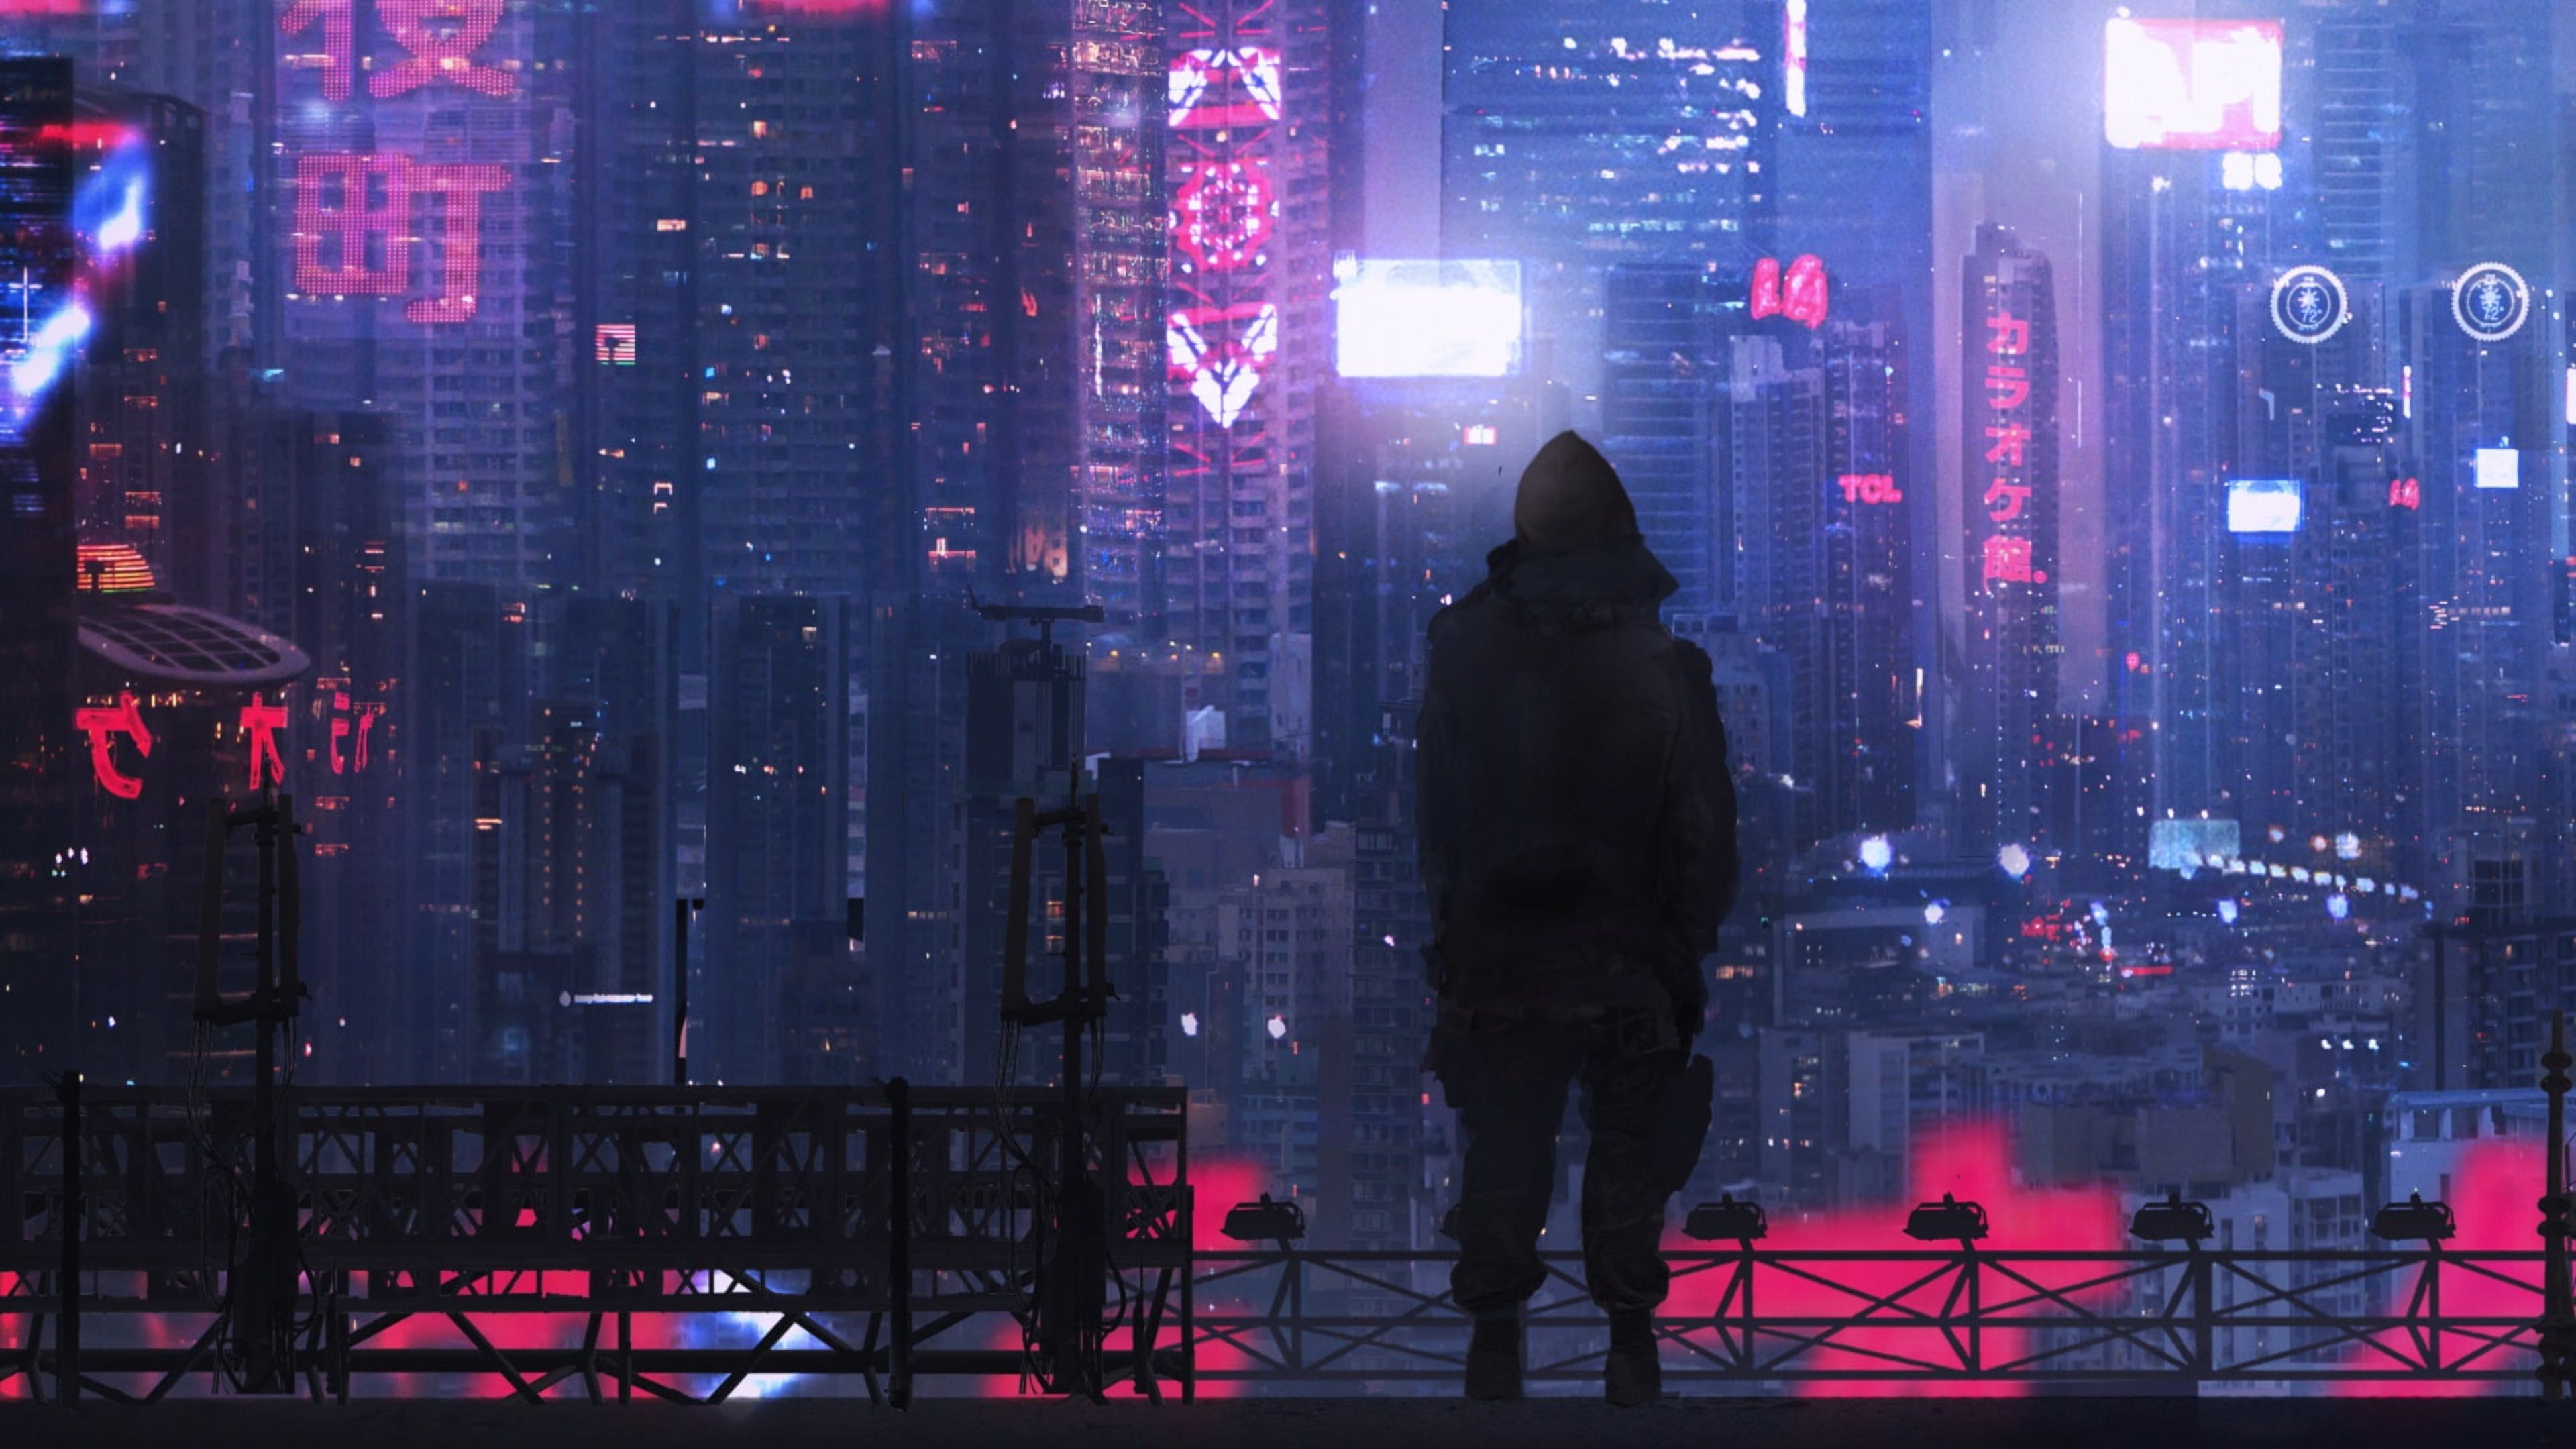 Cyberpunk 4K wallpaper for your desktop or mobile screen free and easy to download